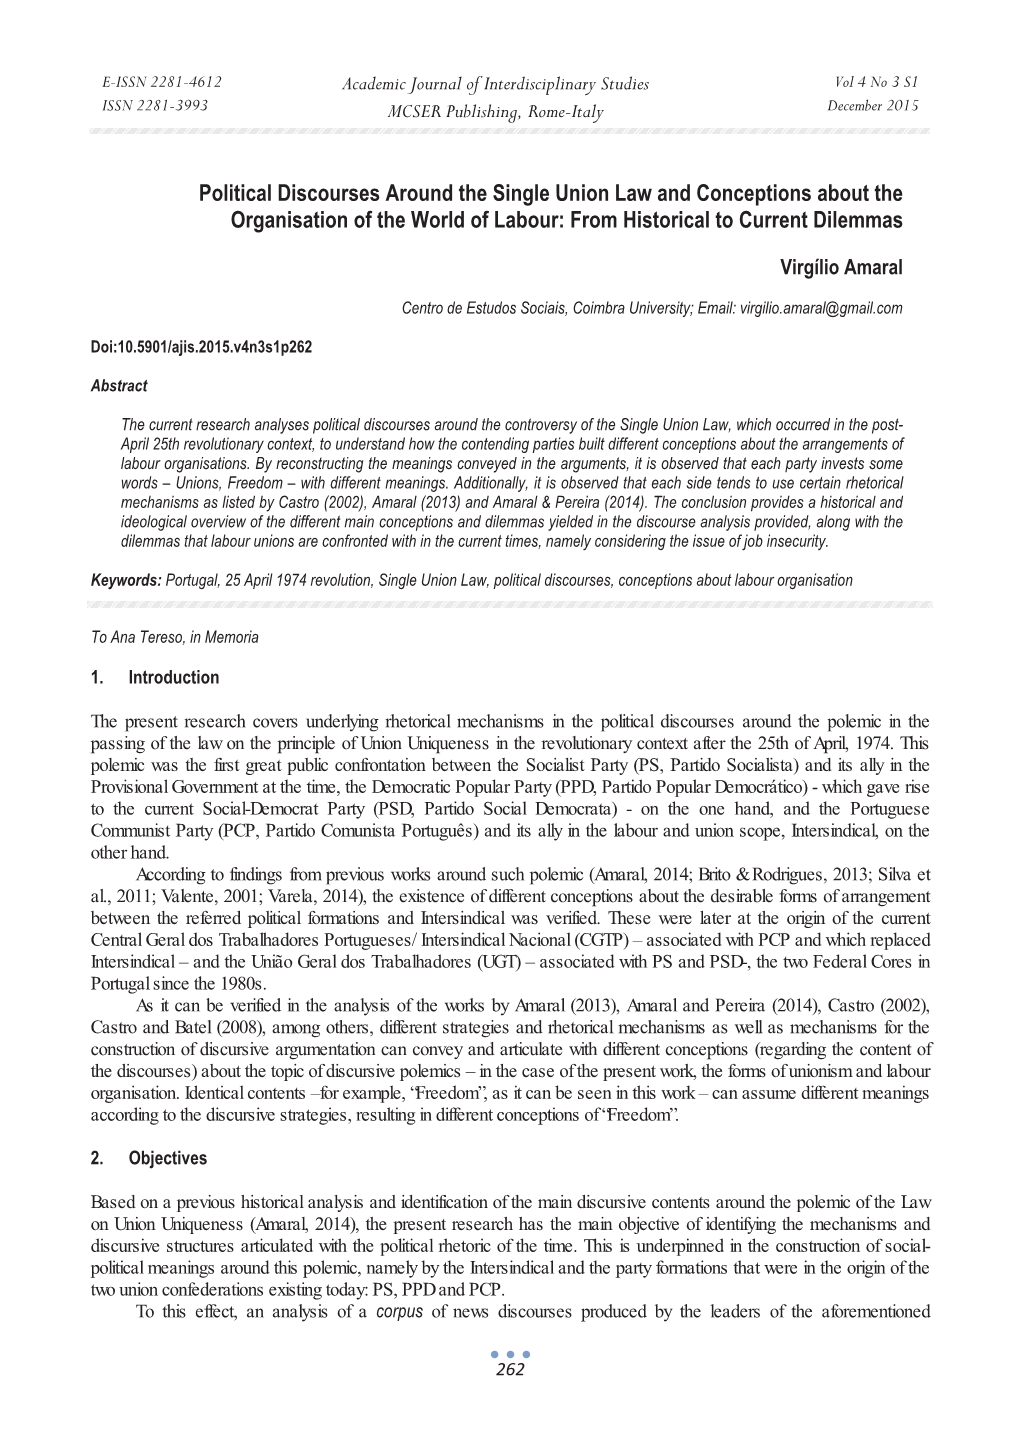 Political Discourses Around the Single Union Law and Conceptions About the Organisation of the World of Labour: from Historical to Current Dilemmas